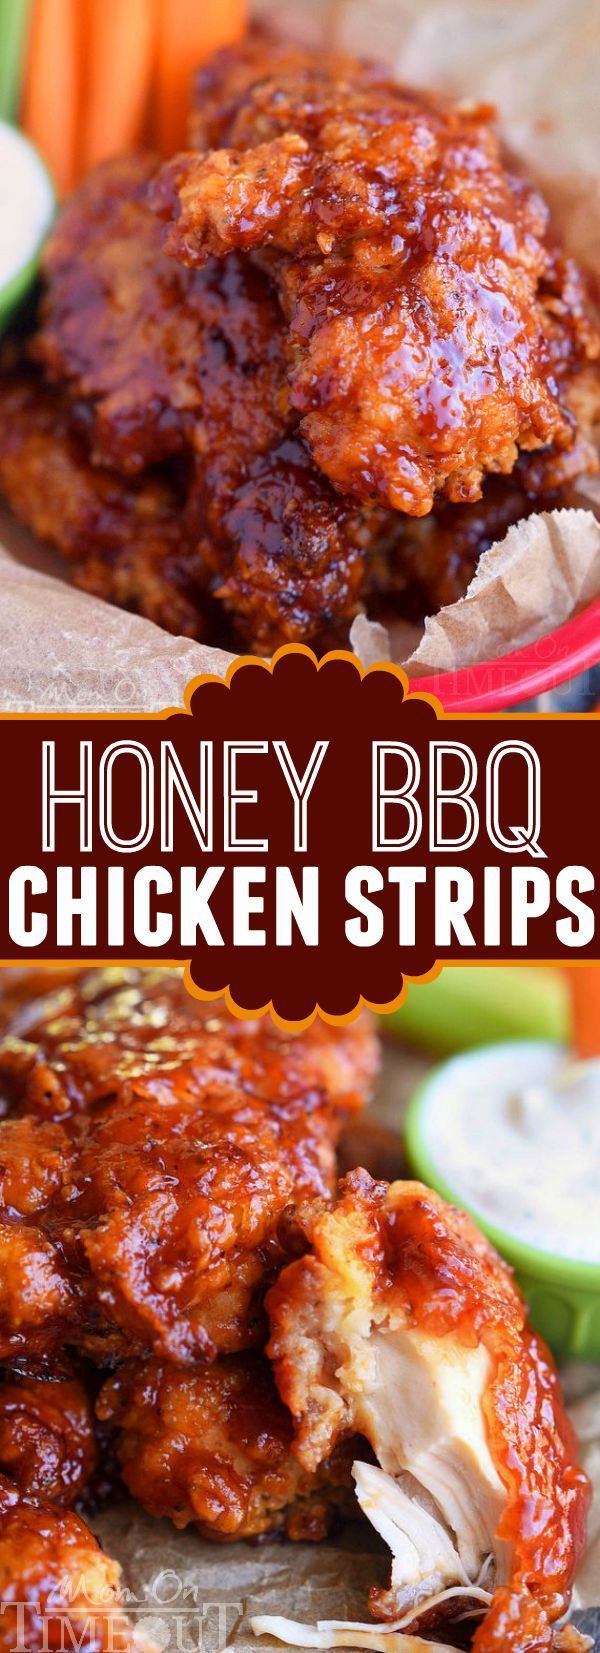 Honey BBQ Chicken Strips – Perfect for dinner or game day! Marinated in buttermilk and perfectly seasoned, these strips are hard